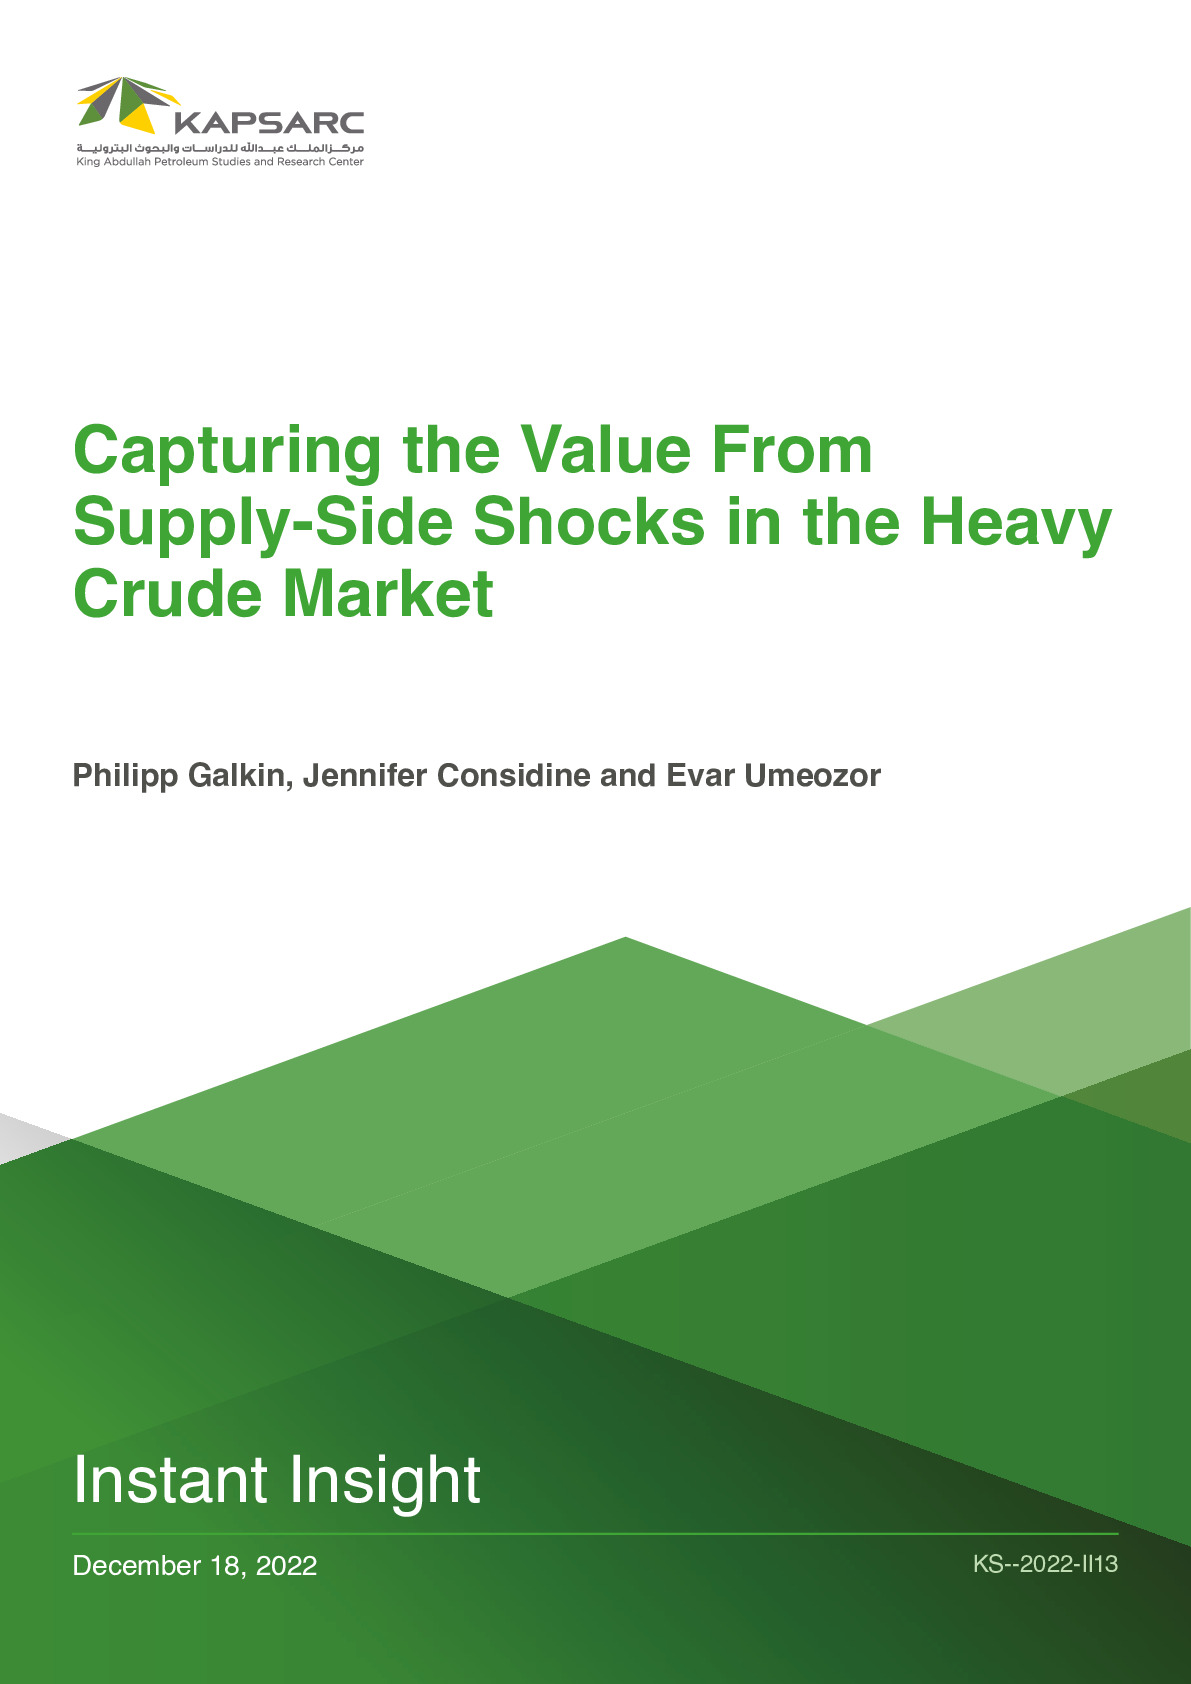 Capturing the Value From Supply-Side Shocks in the Heavy Crude Market